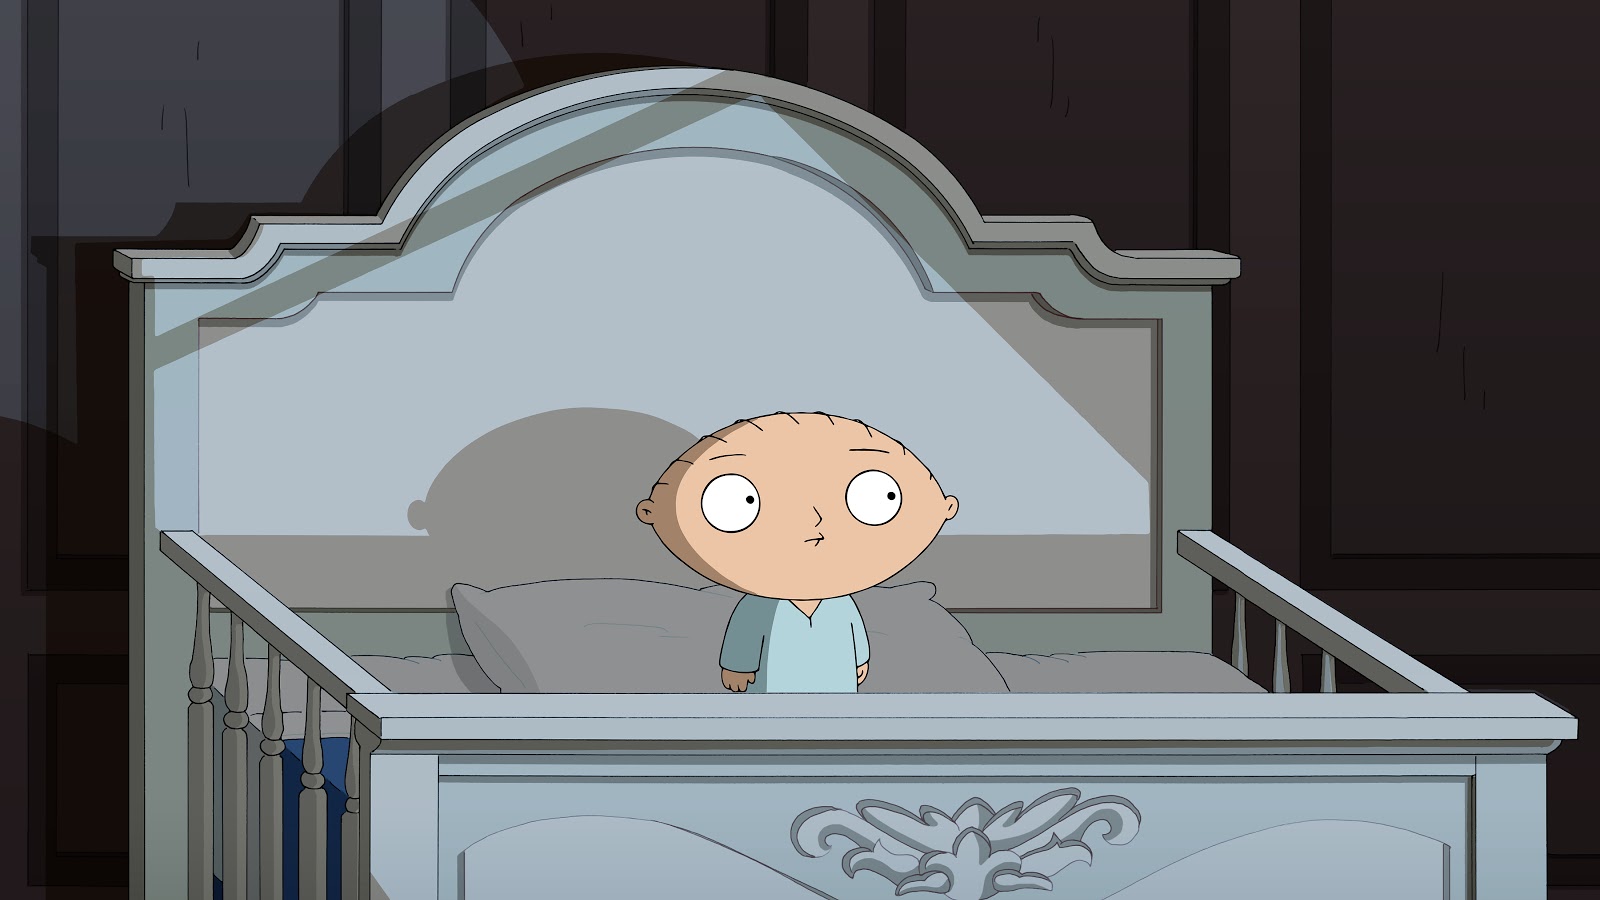 Family Guy - Episode 12.21 - Chap Stewie (Season Finale) - Promotional Photos + Synopsis